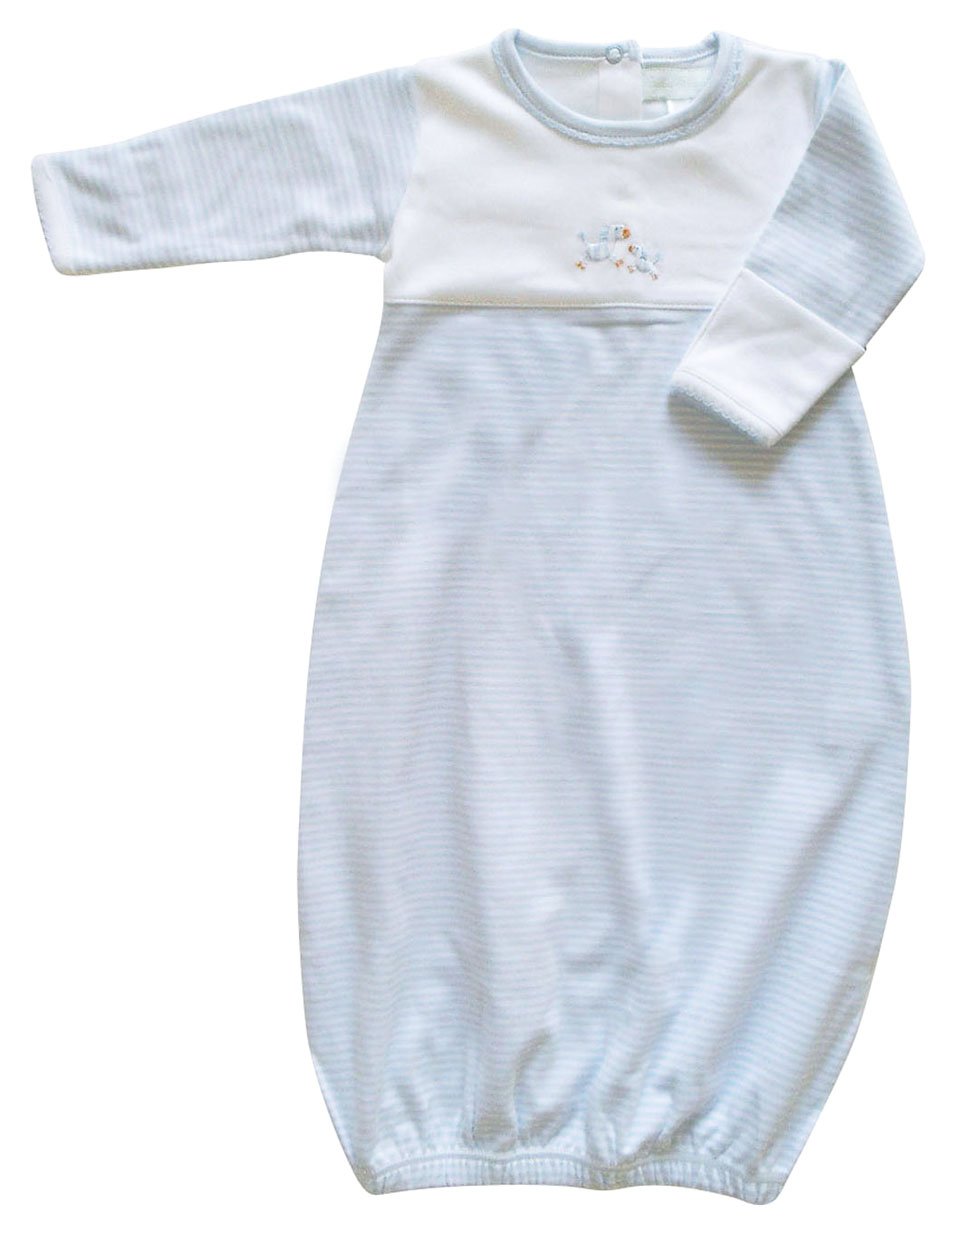 Buy hand smocked baby daygowns - Marco and Lizzy